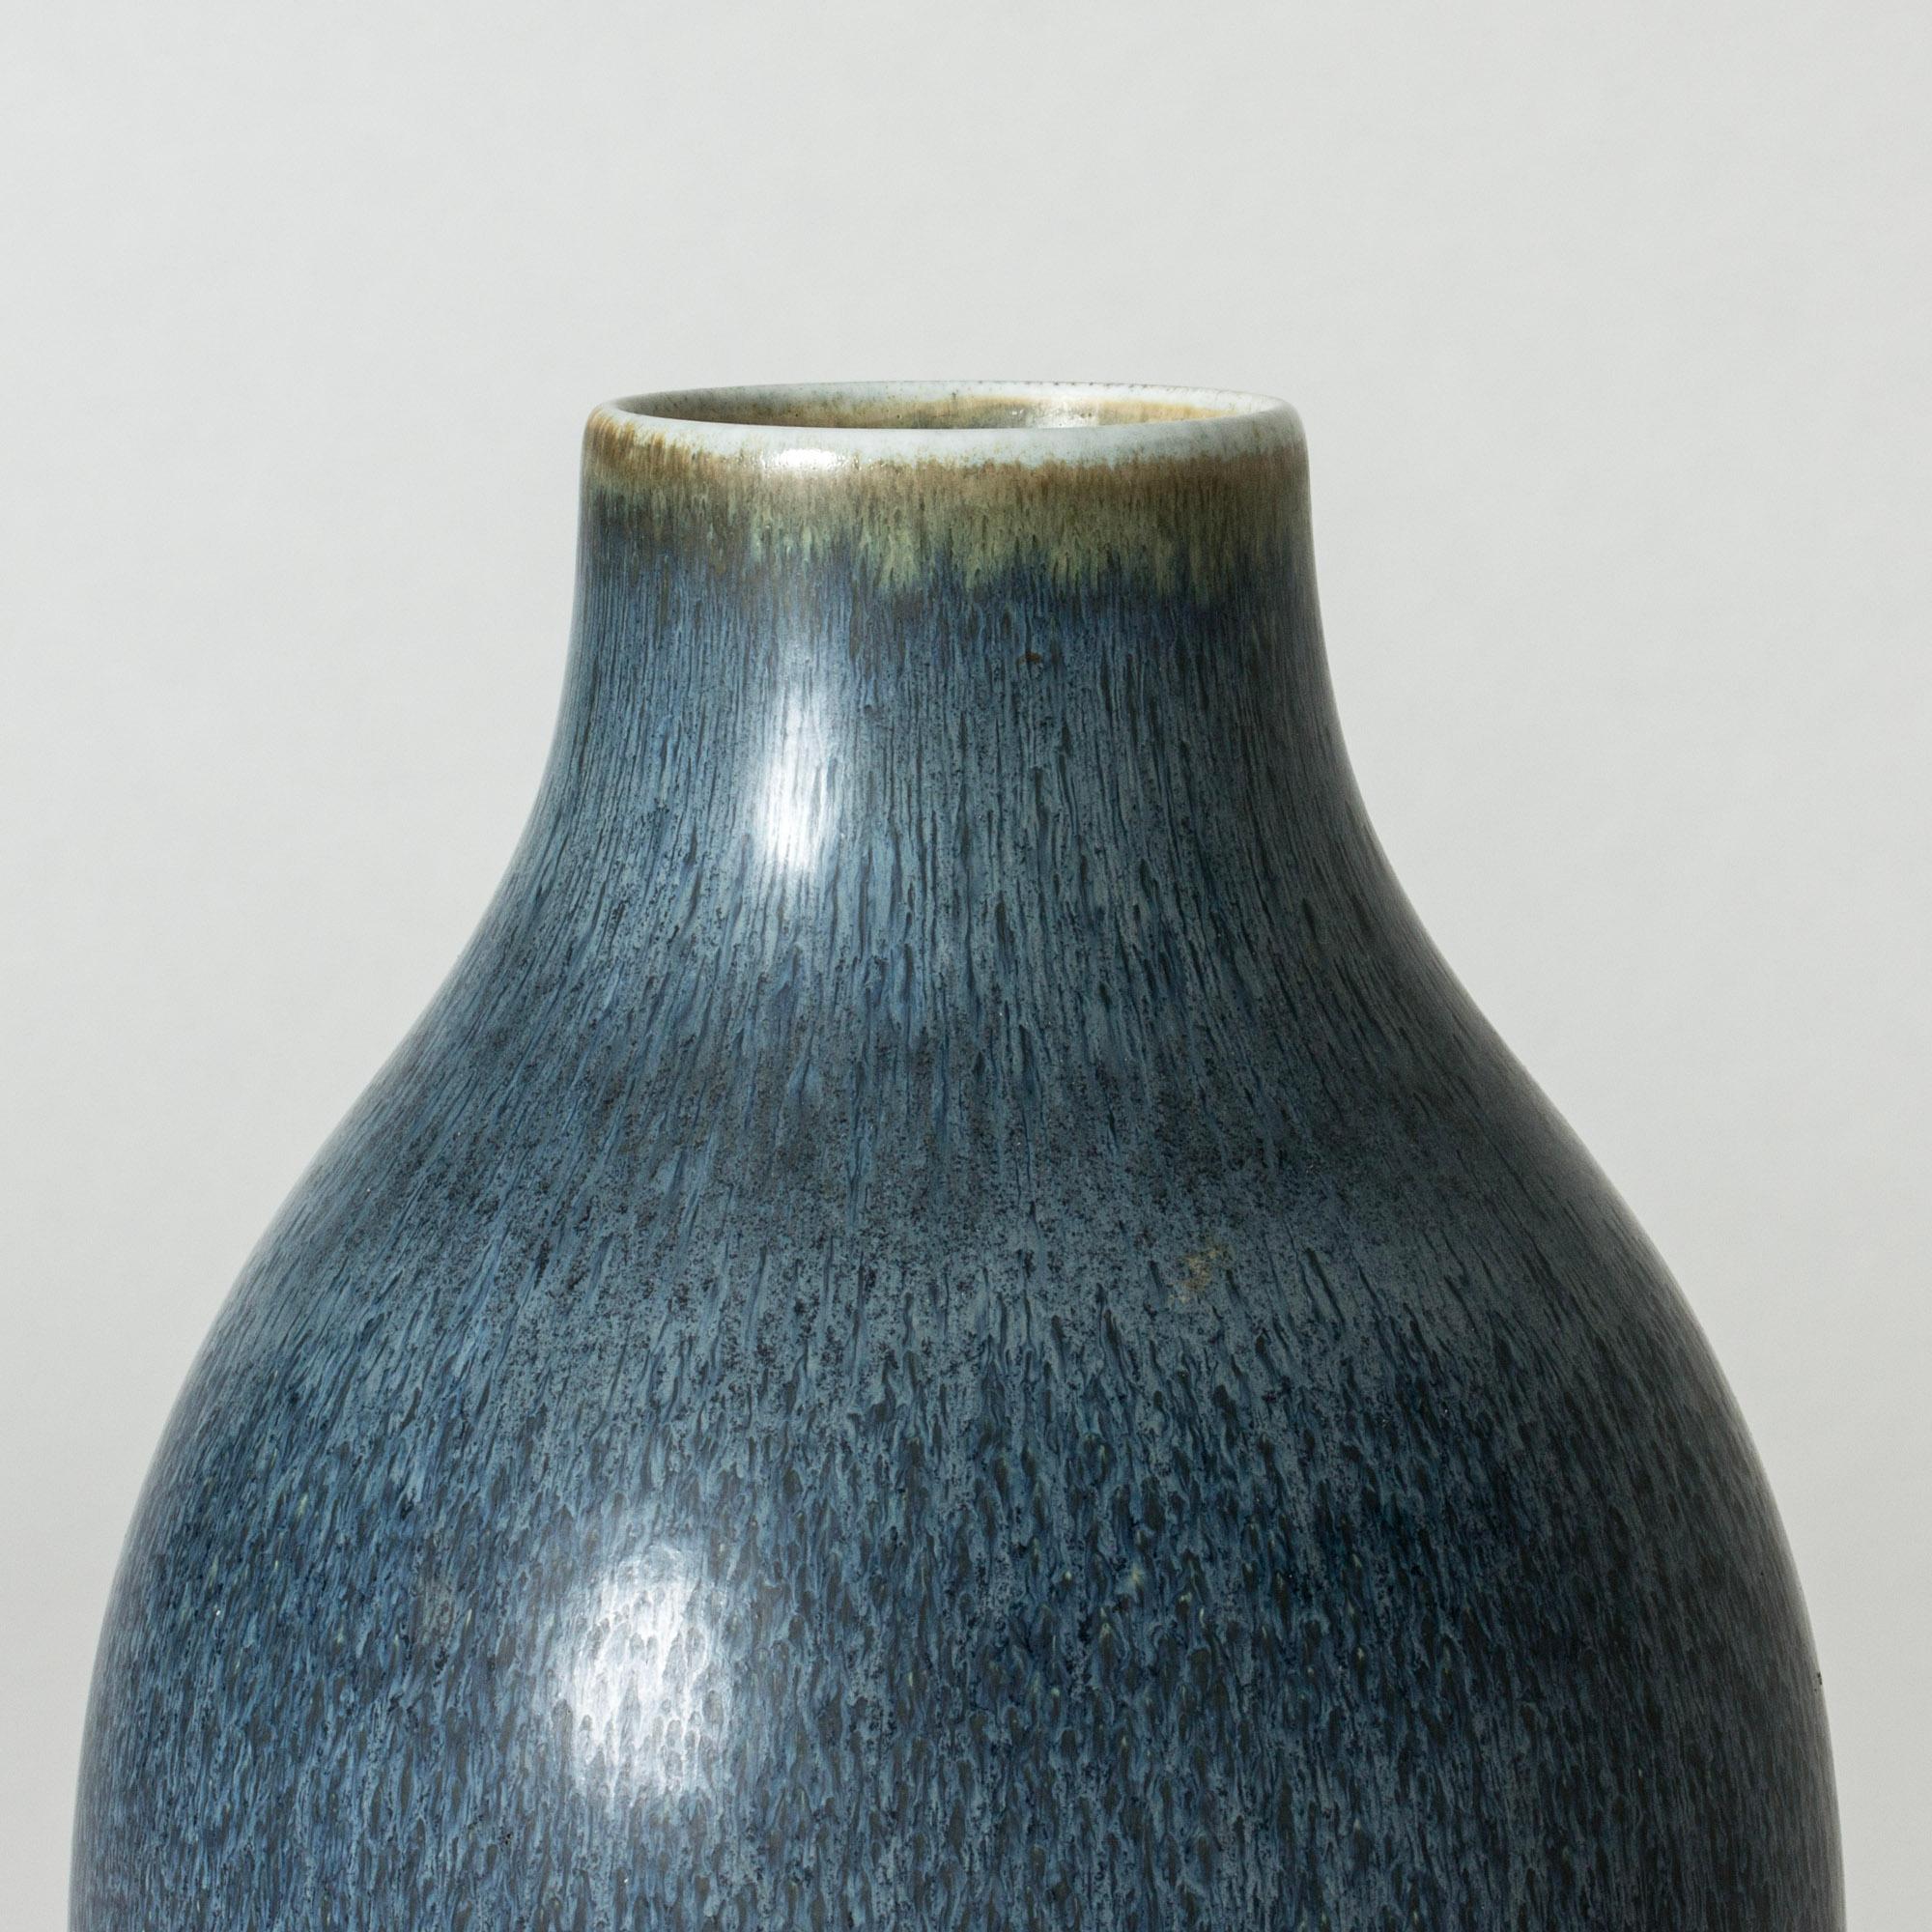 Statuesque stoneware floor vase by Carl-Harry Stålhane, in a clean form with beautiful blue glaze with a somewhat grainy look.

Carl-Harry Stålhane was one of the stars among Swedish ceramic artists during the 1950s, 1960s and 1970s, whose designs